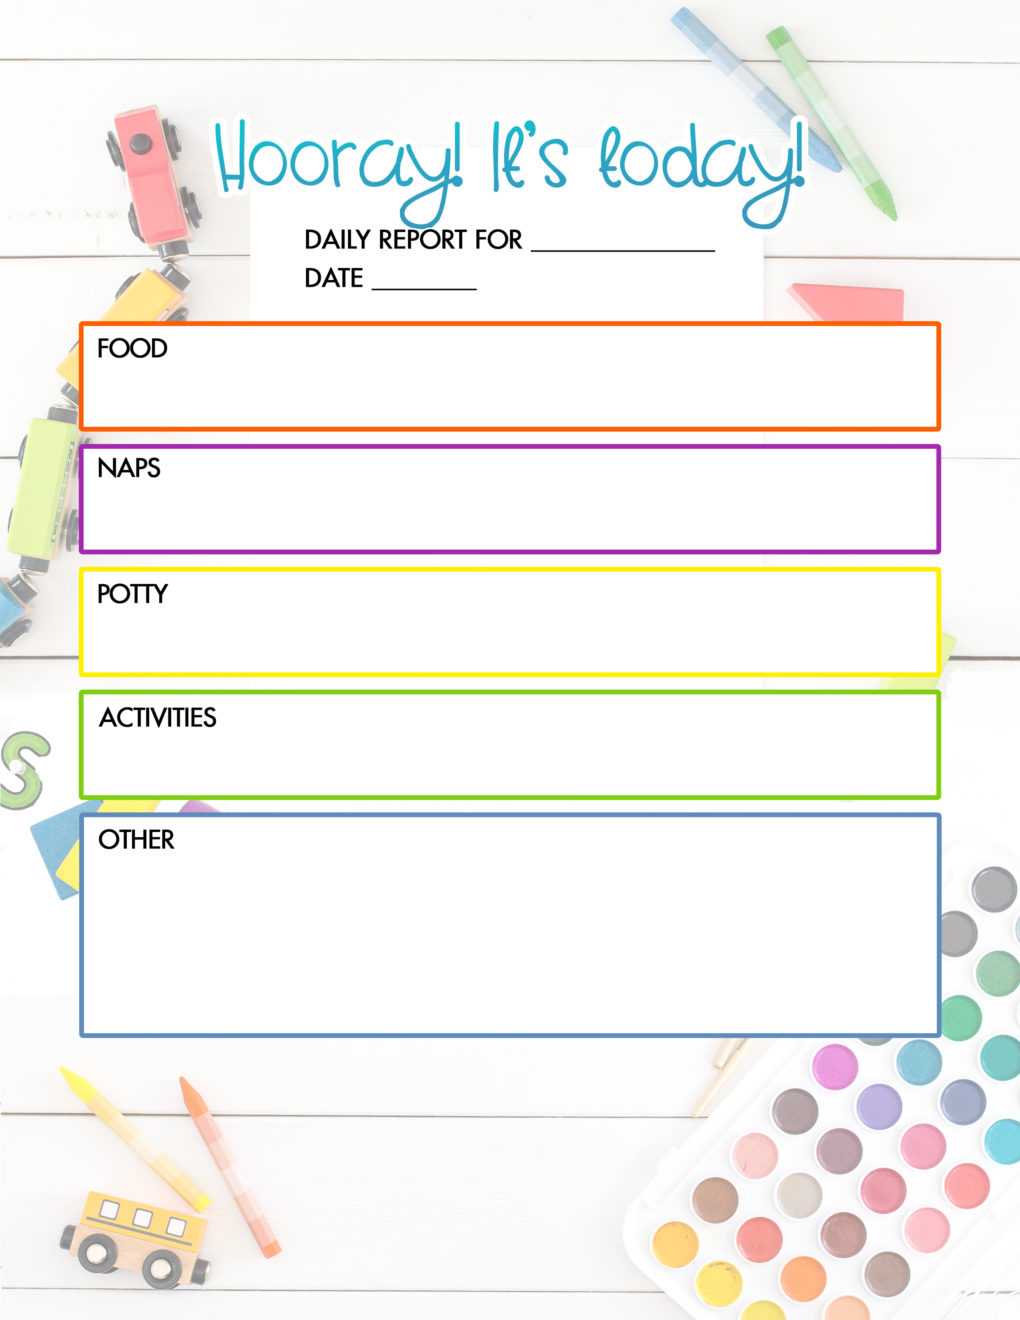 Free Daycare Daily Report | Child Care Printable – The Diy Regarding Daycare Infant Daily Report Template